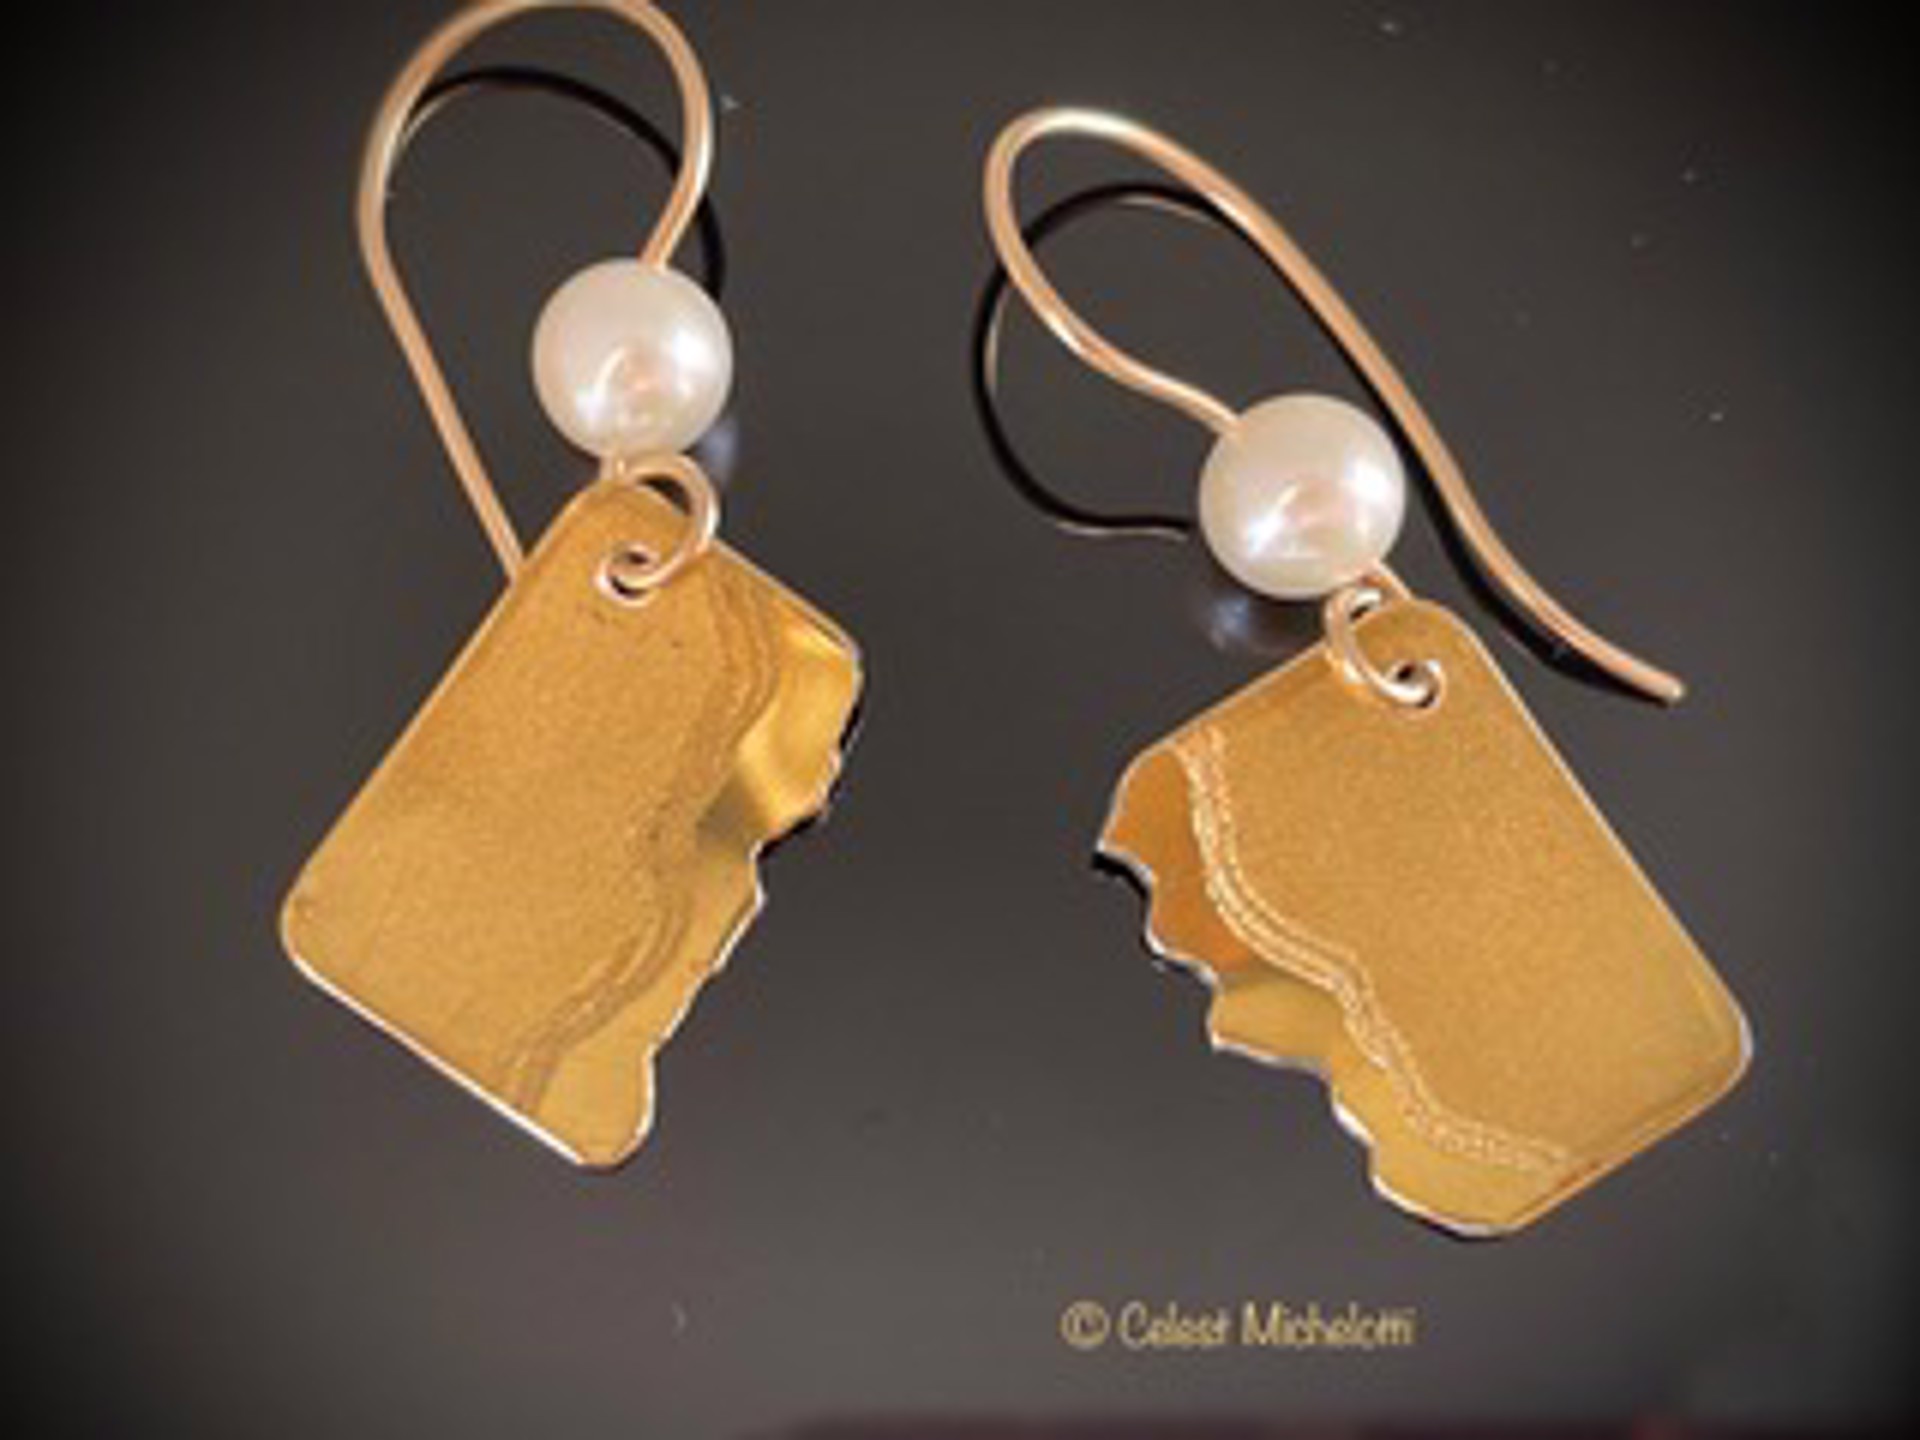 Distant Planets earrings with white pearls by Celest Michelotti